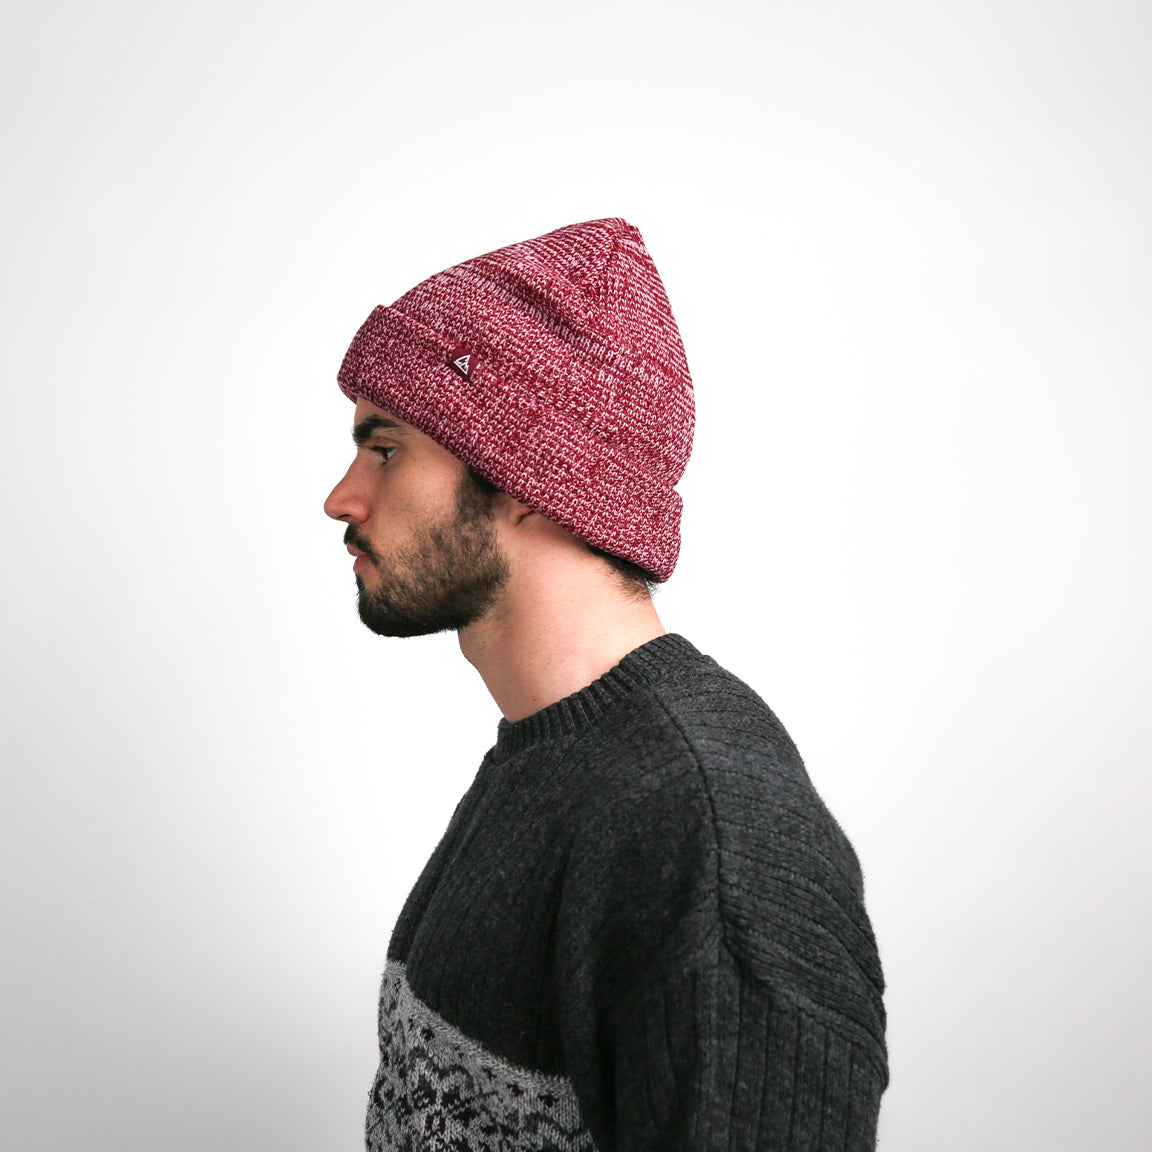 From the side, the beanie's heathered burgundy fabric and relaxed fit are evident, along with a small black logo patch that offers a unique detail to the design.